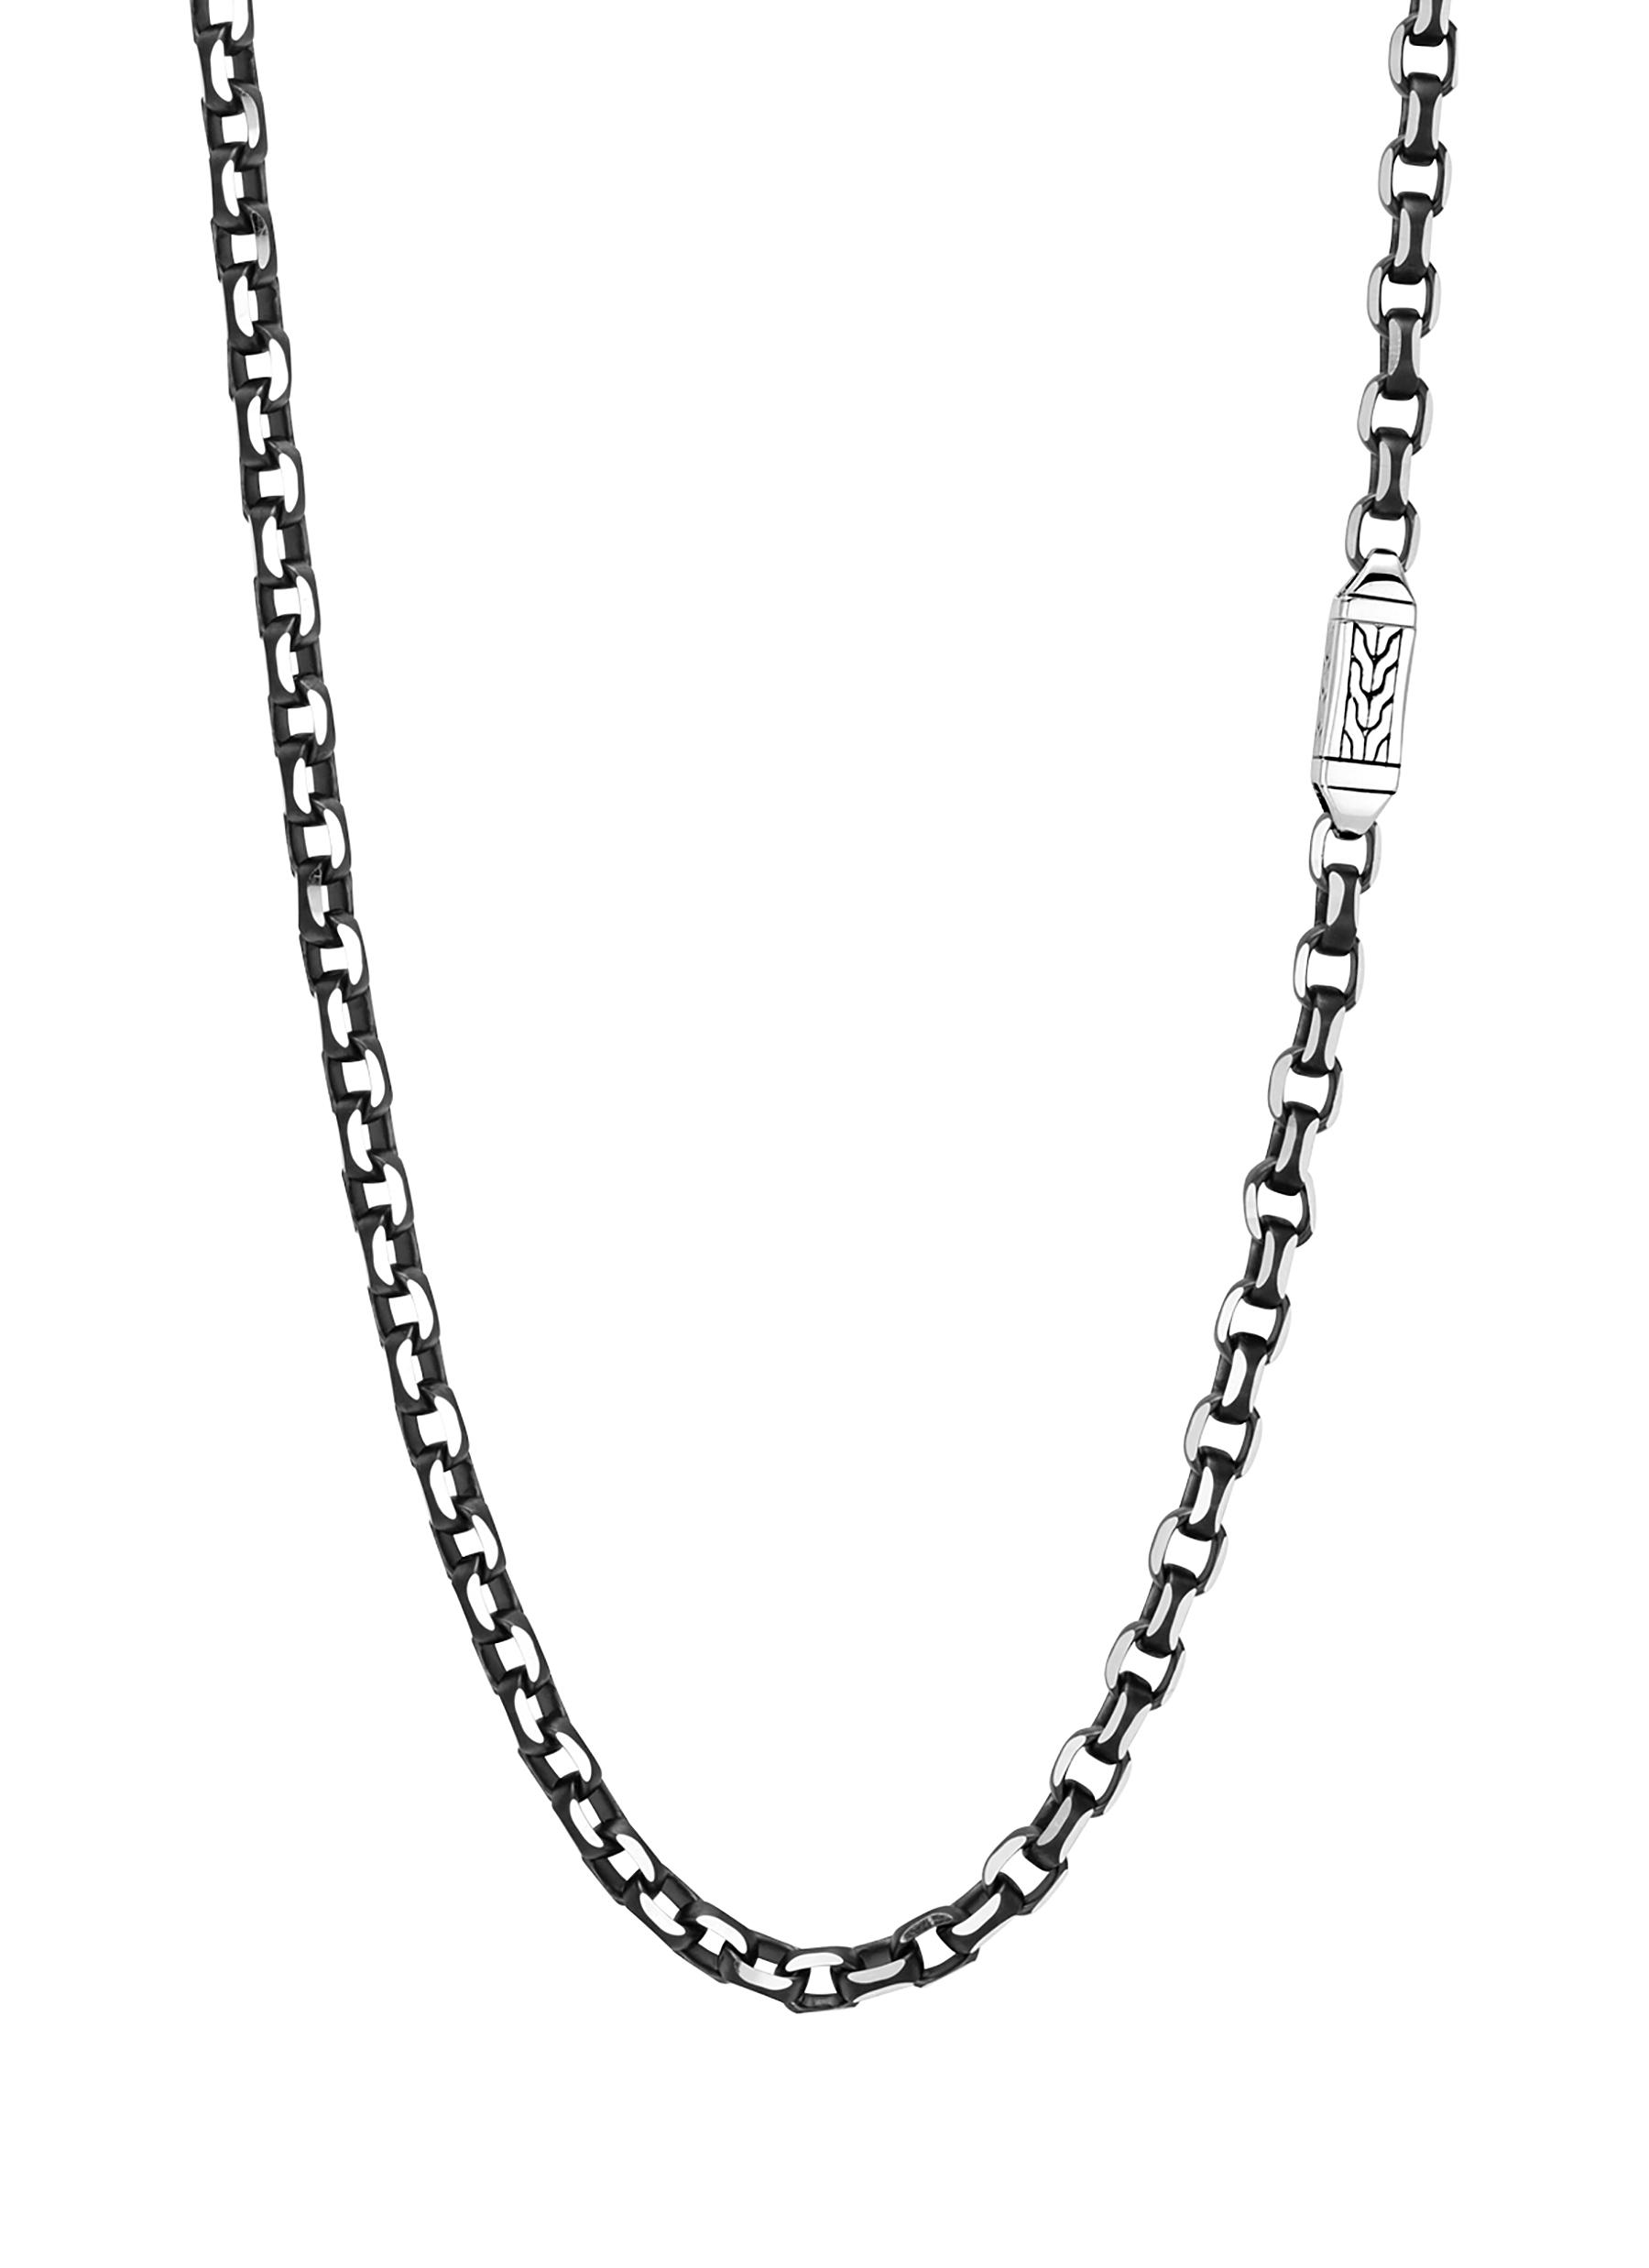 JOHN HARDY 'Classic Chain' black PVD silver link necklace